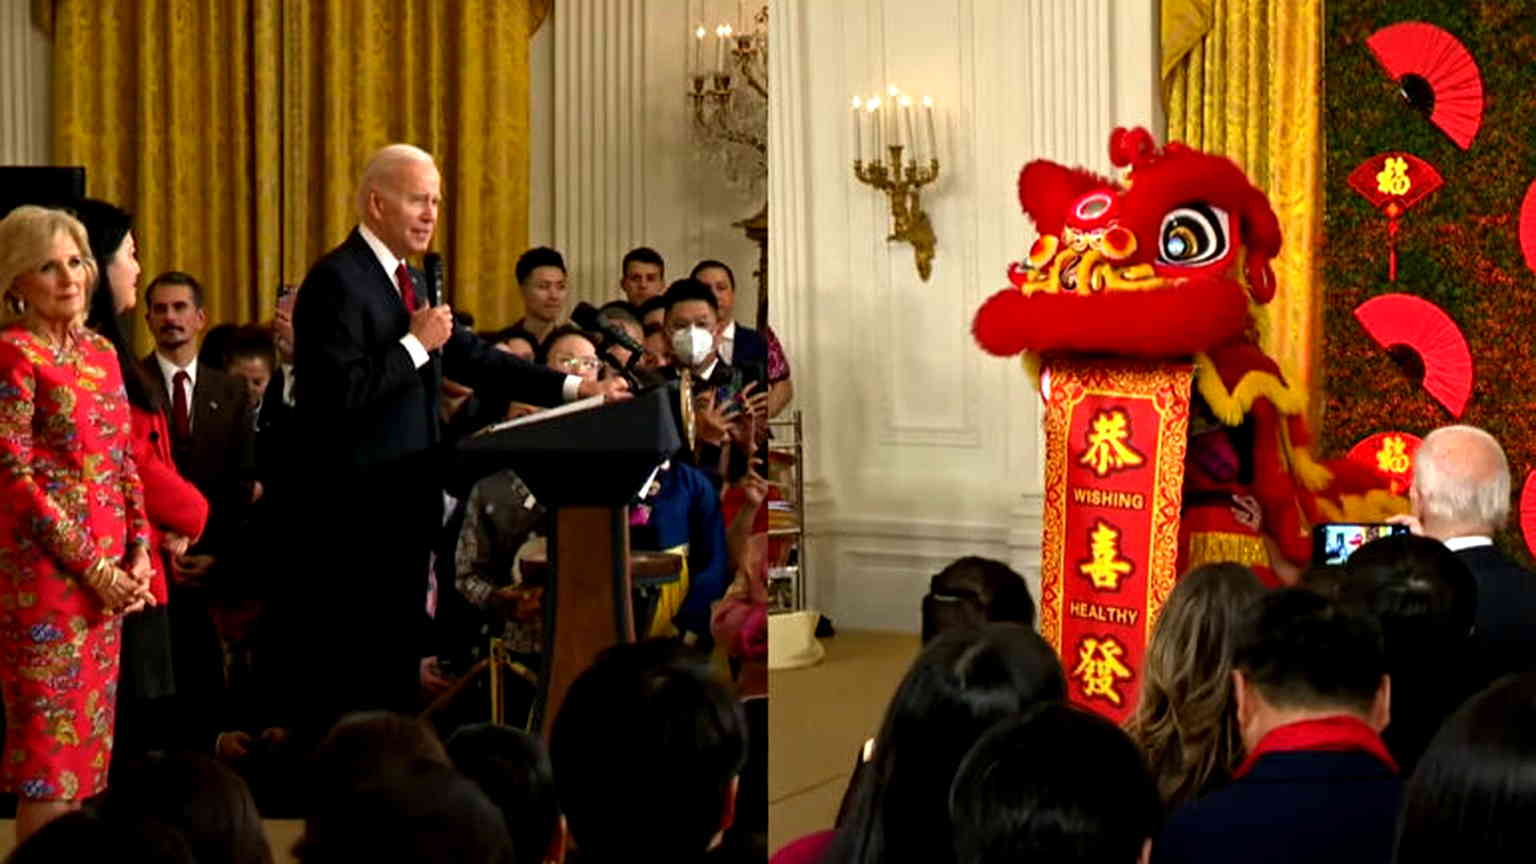 ‘I will not be silent’: Biden calls for end to hate in White House’s first Lunar New Year celebration